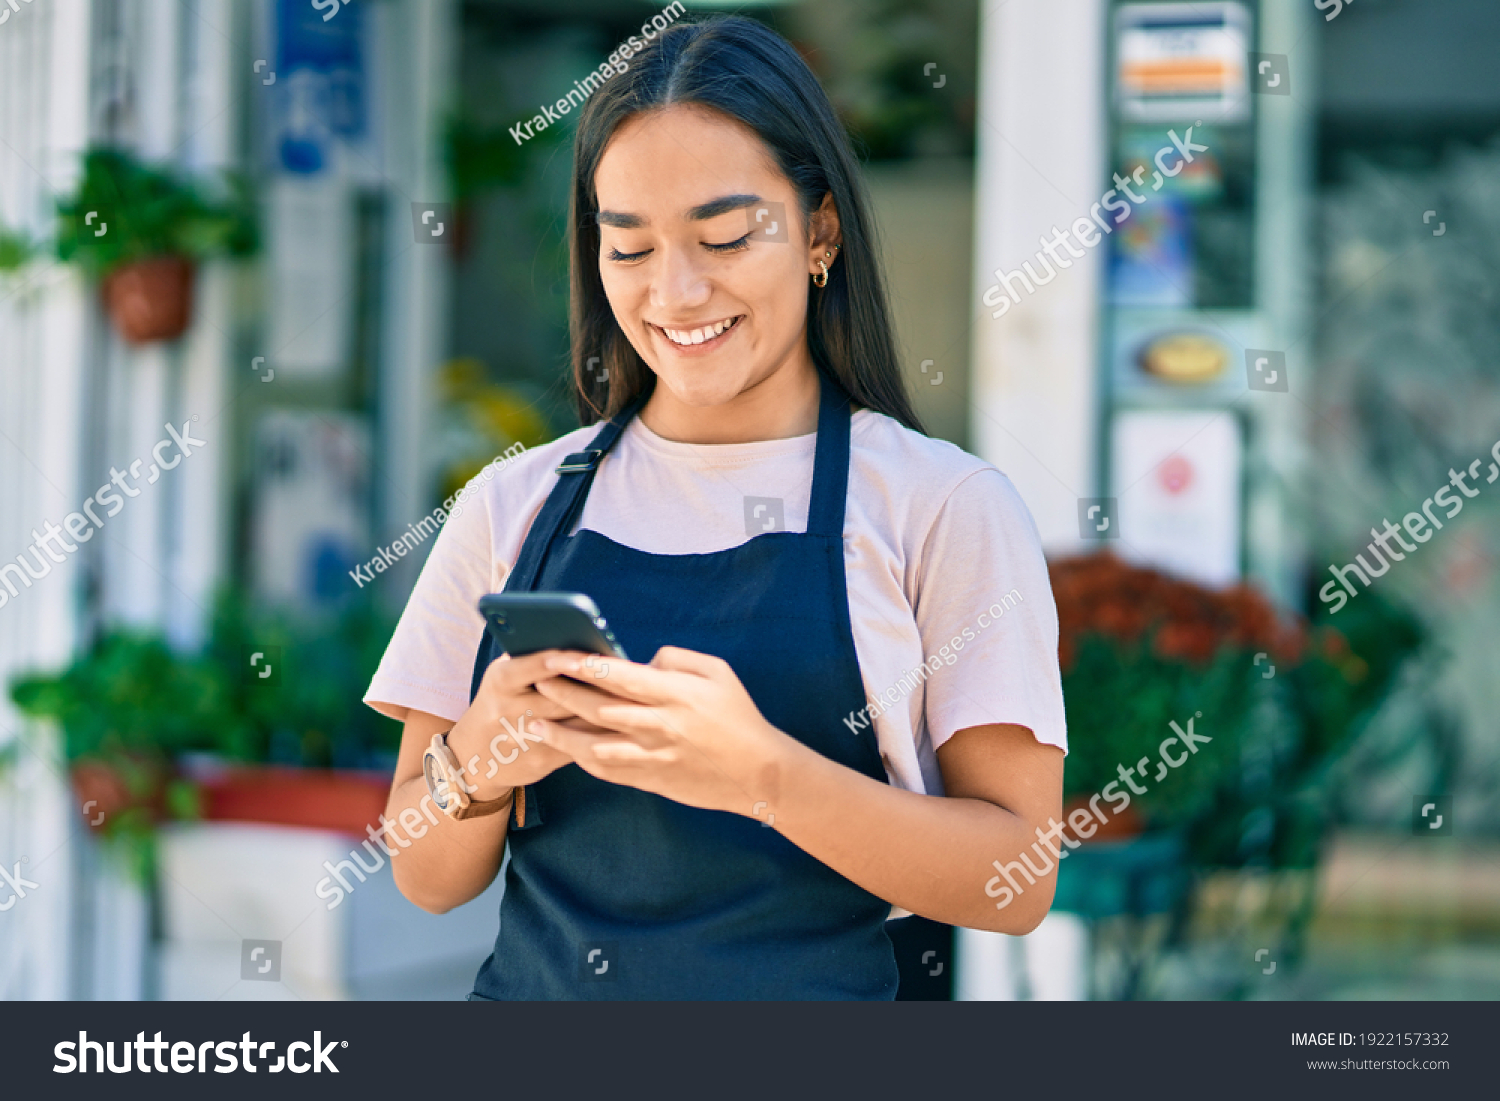 Young latin shopkeeper girl smiling happy using smartphone at florist. #1922157332